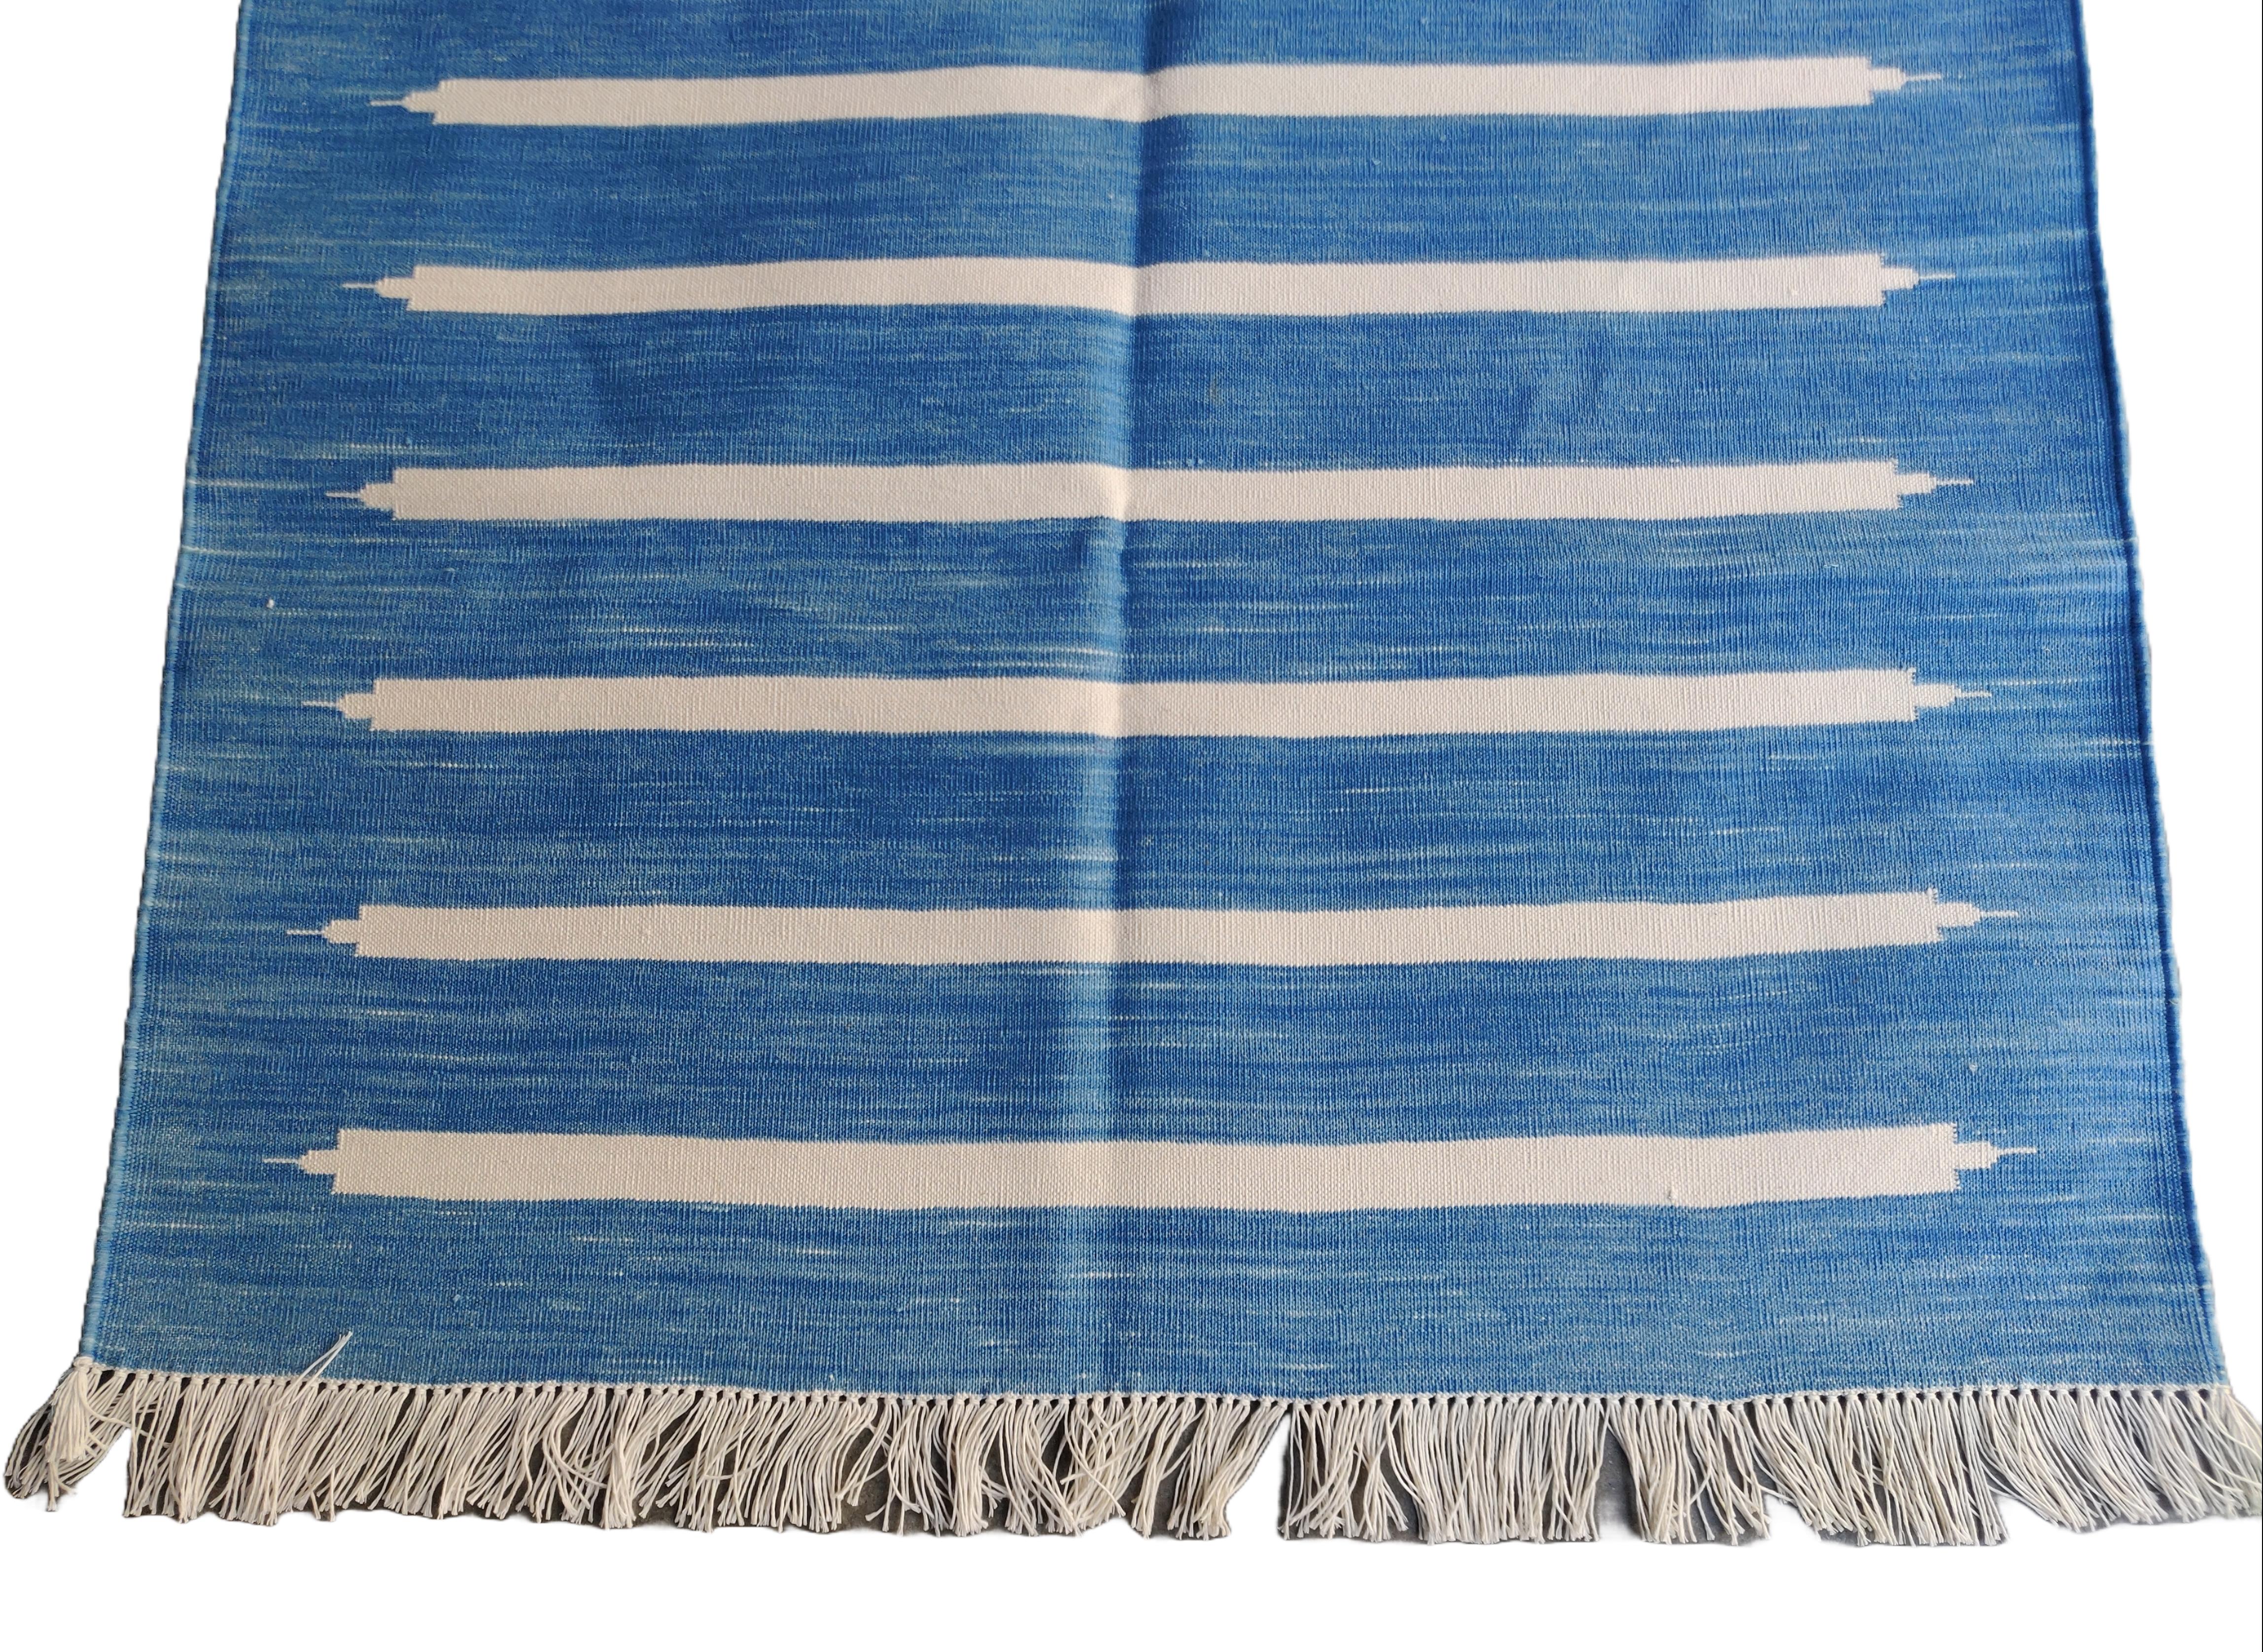 Hand-Woven Handmade Cotton Area Flat Weave Rug, 3x5 Blue And White Striped Indian Dhurrie For Sale